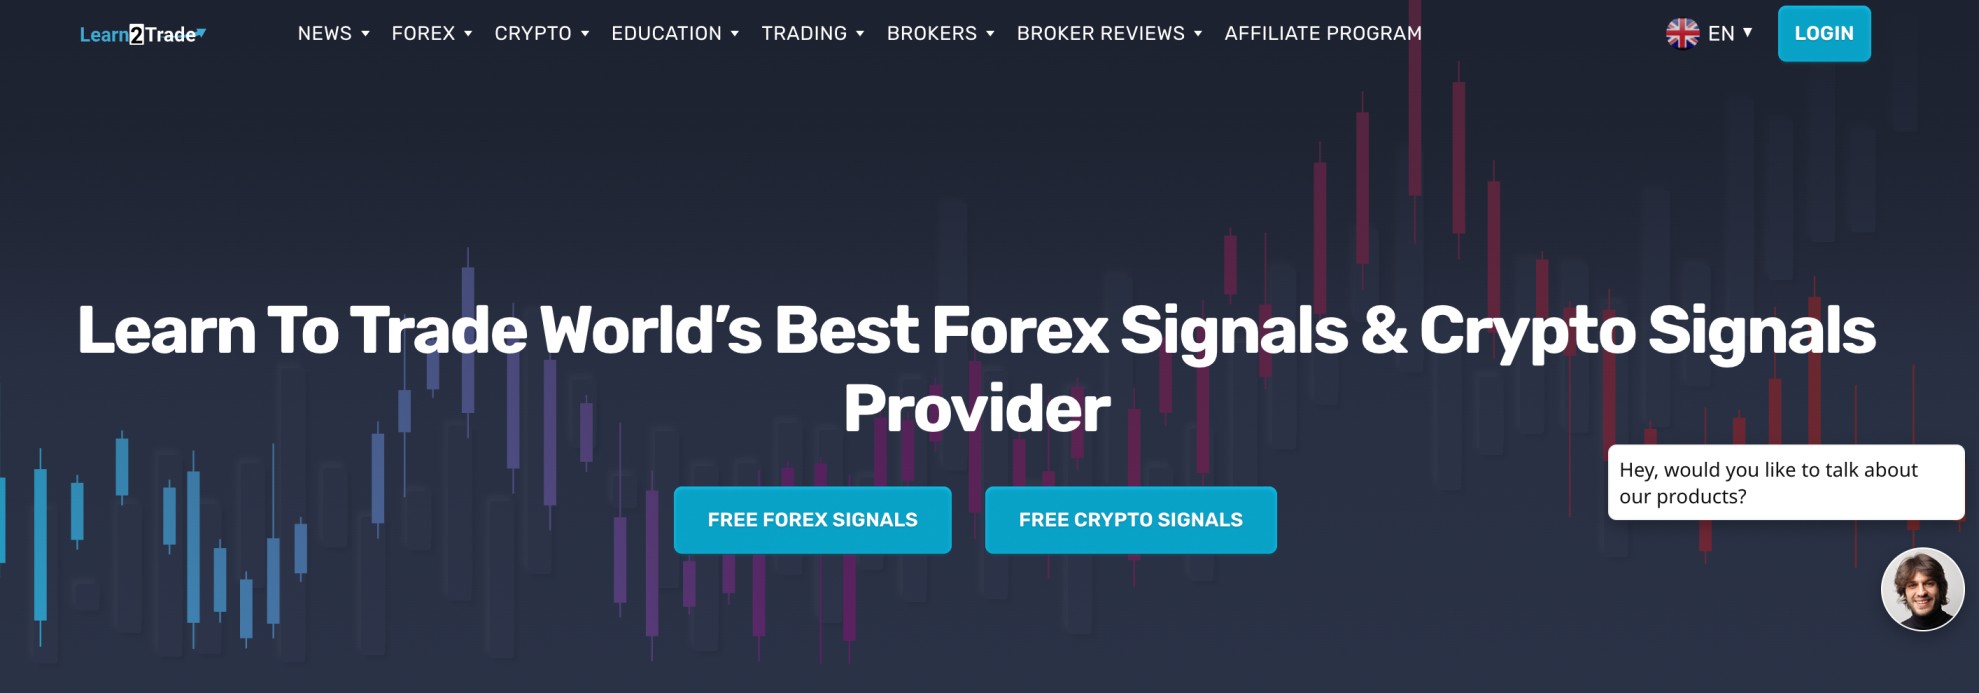 Forex free signal provider software best forex charting appearance